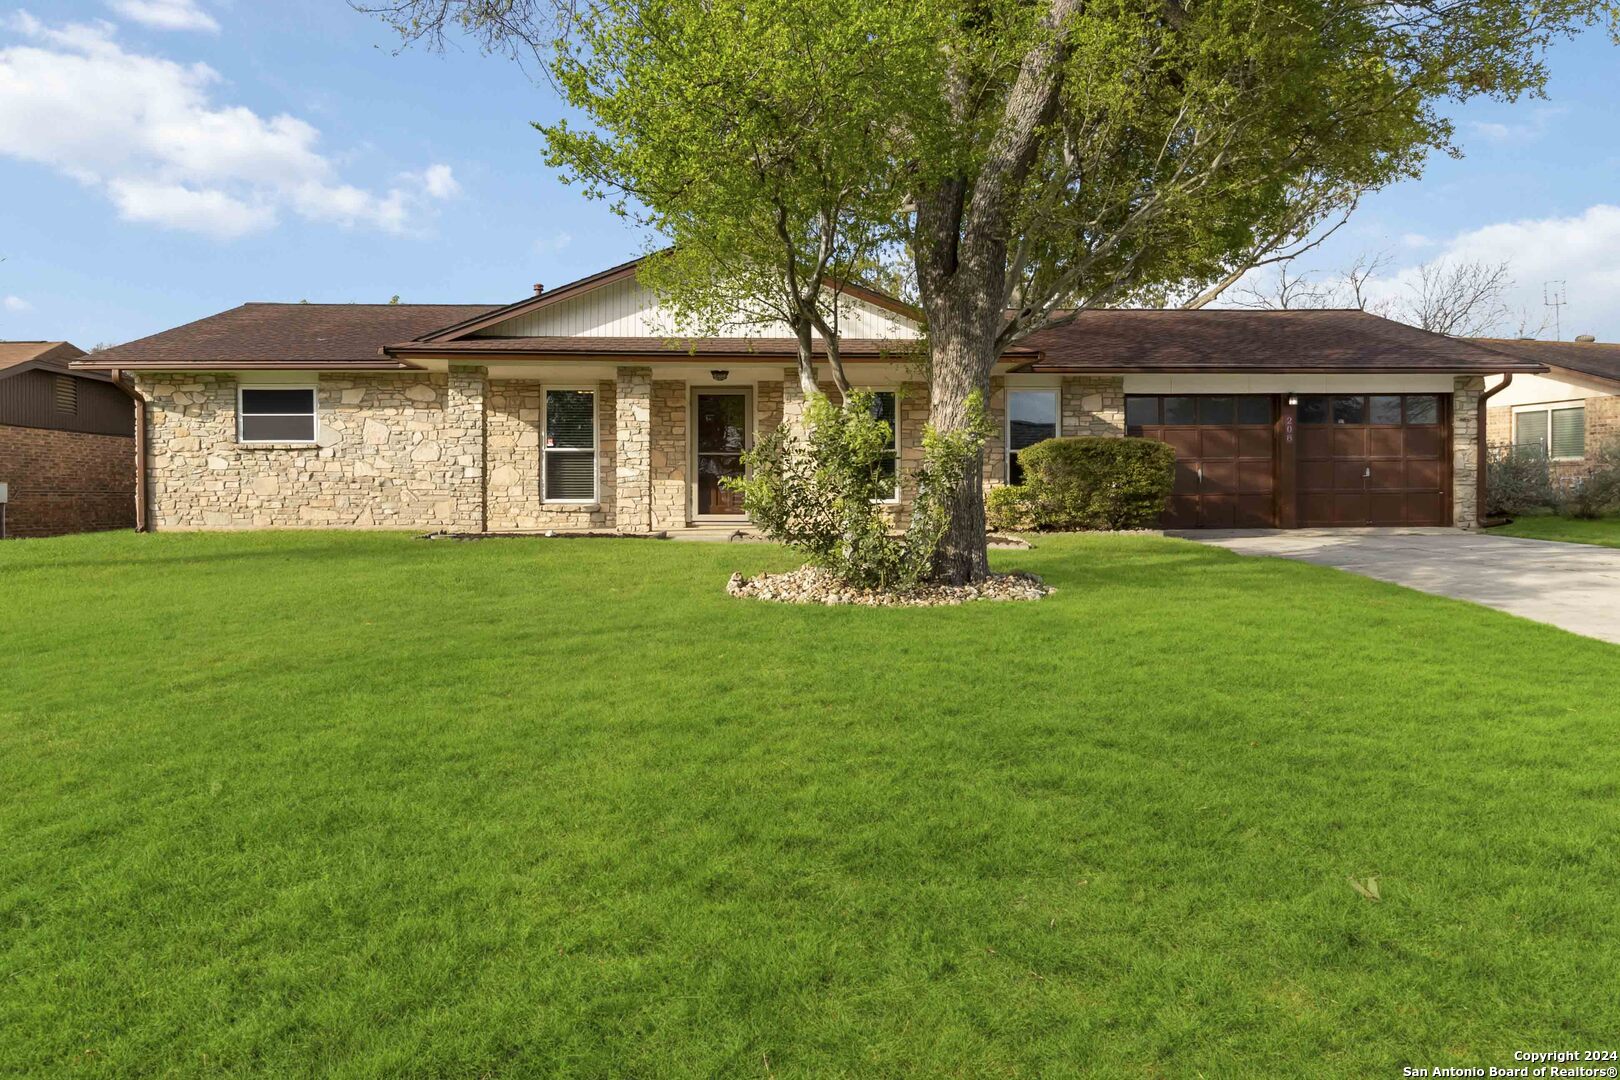 Photo of 208 Suncliff Dr in Universal City, TX